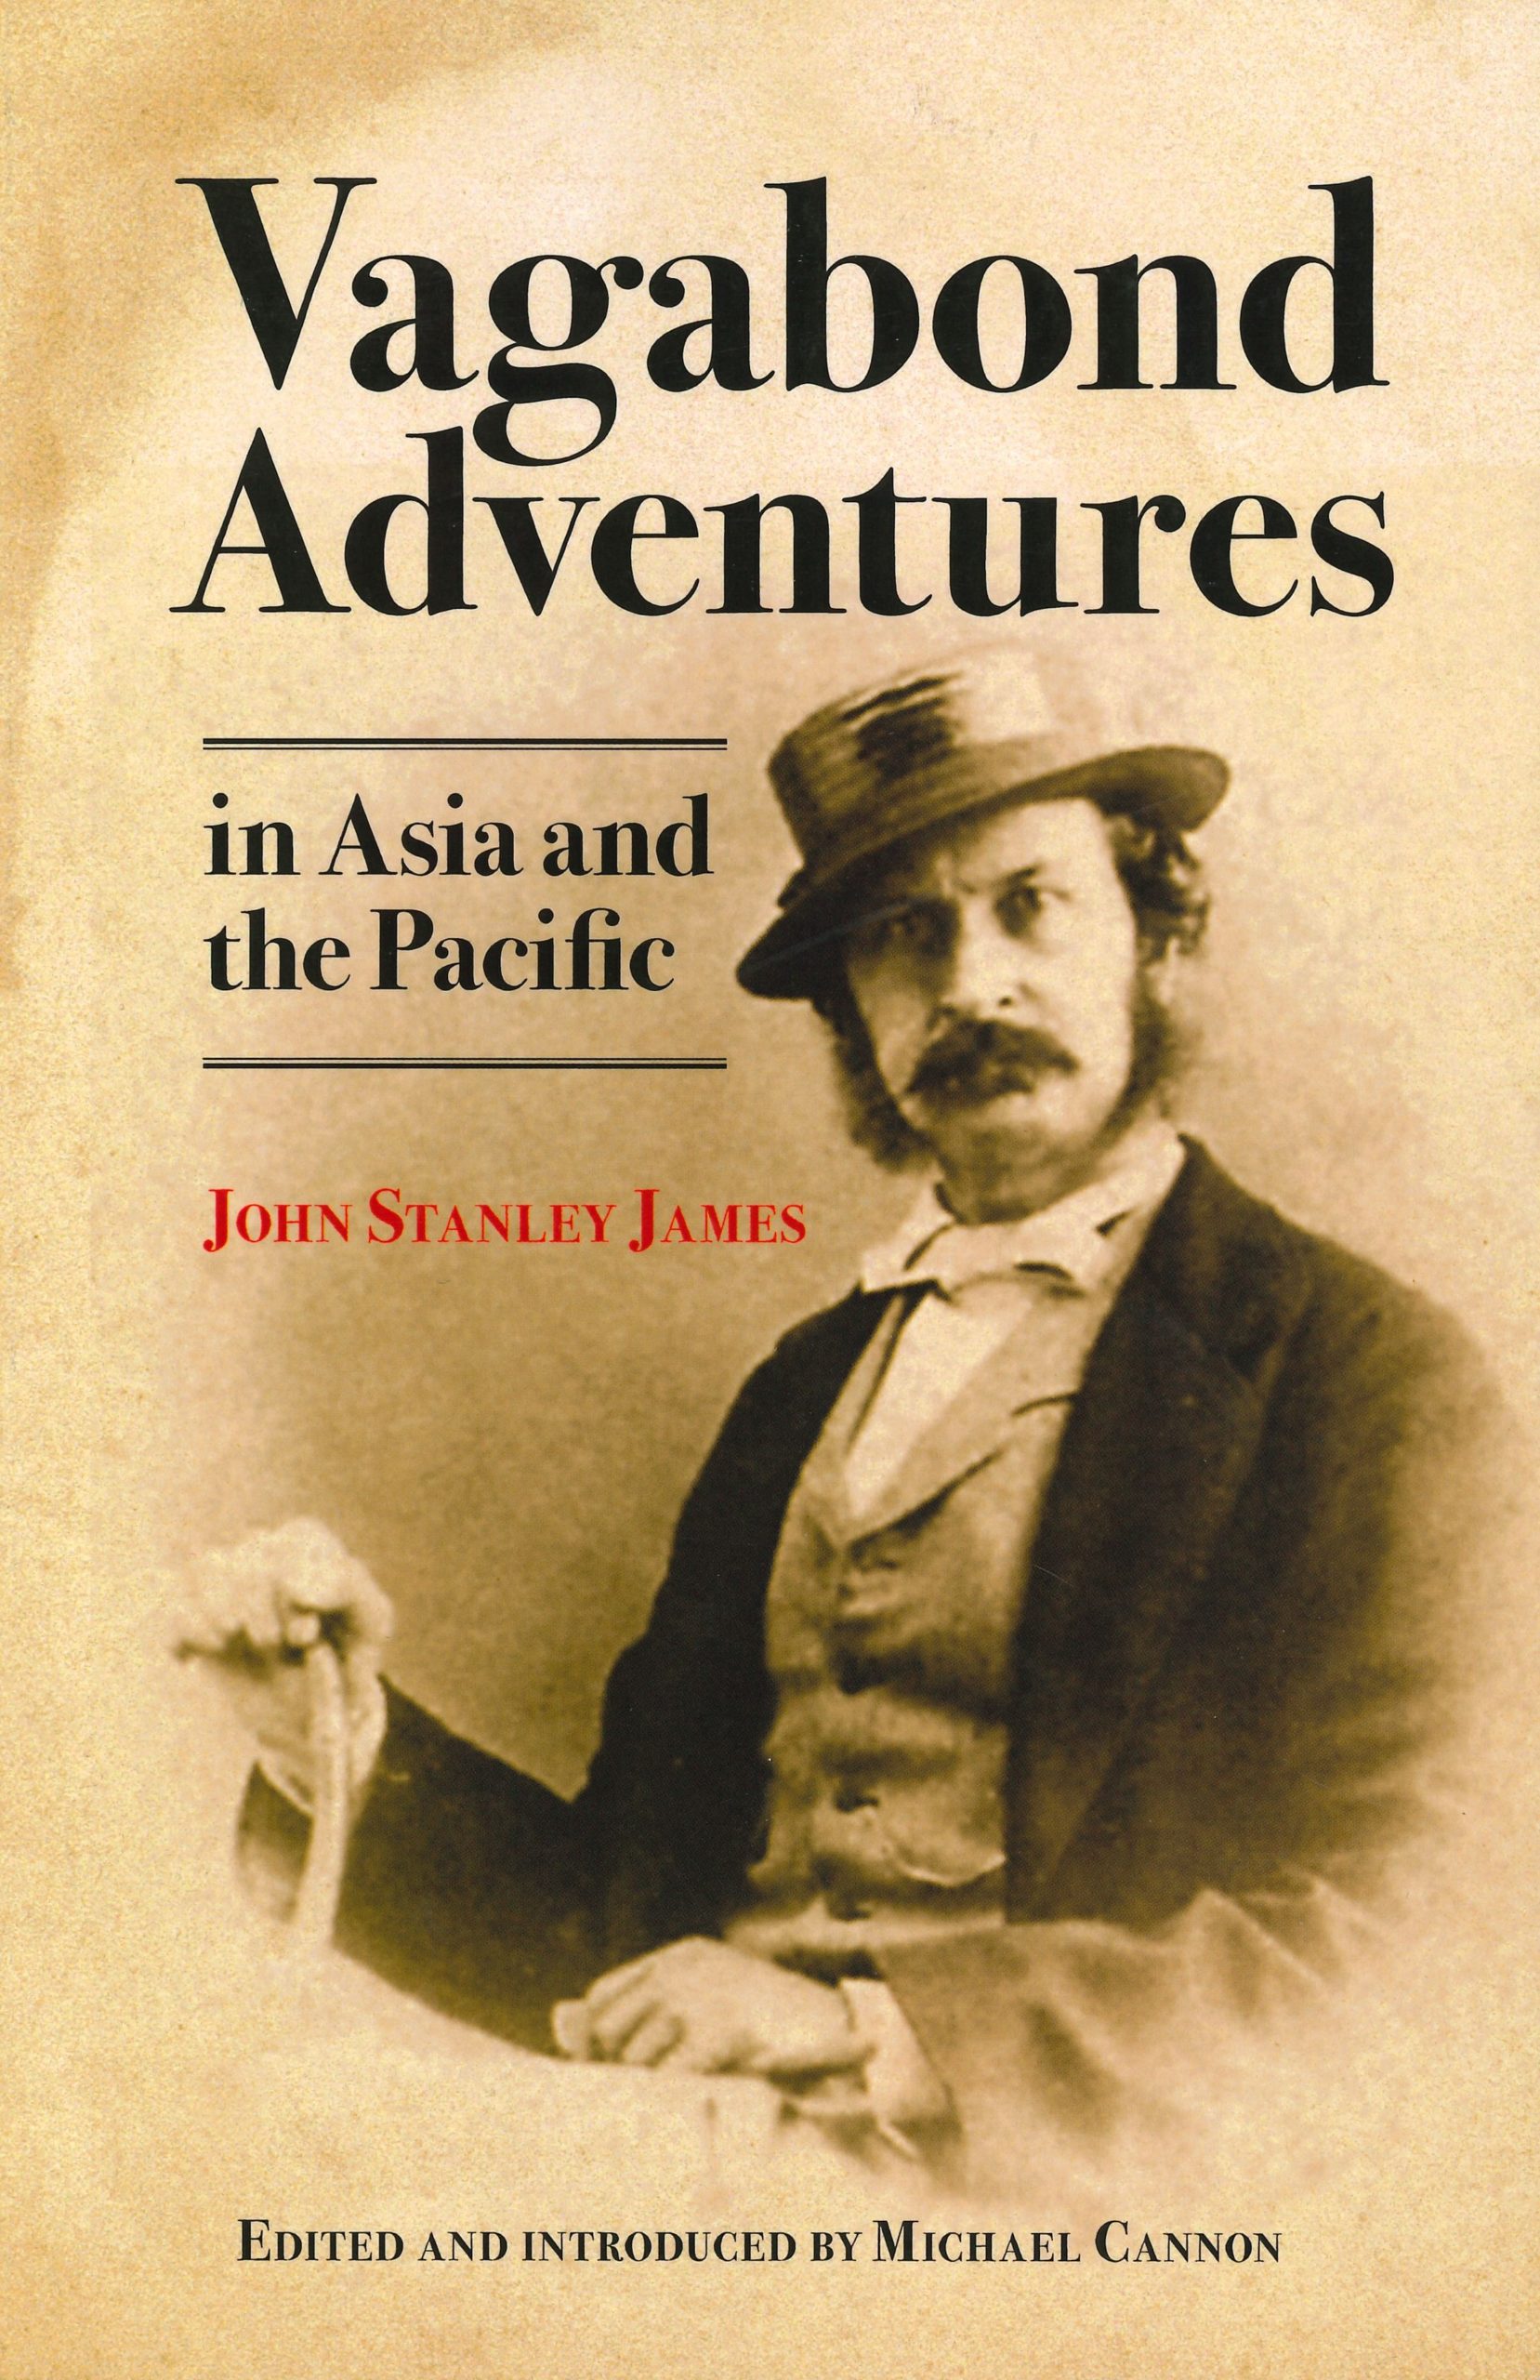 Vagabond Adventures in and the Pacific. By Michael Cannon Historical Society of Victoria